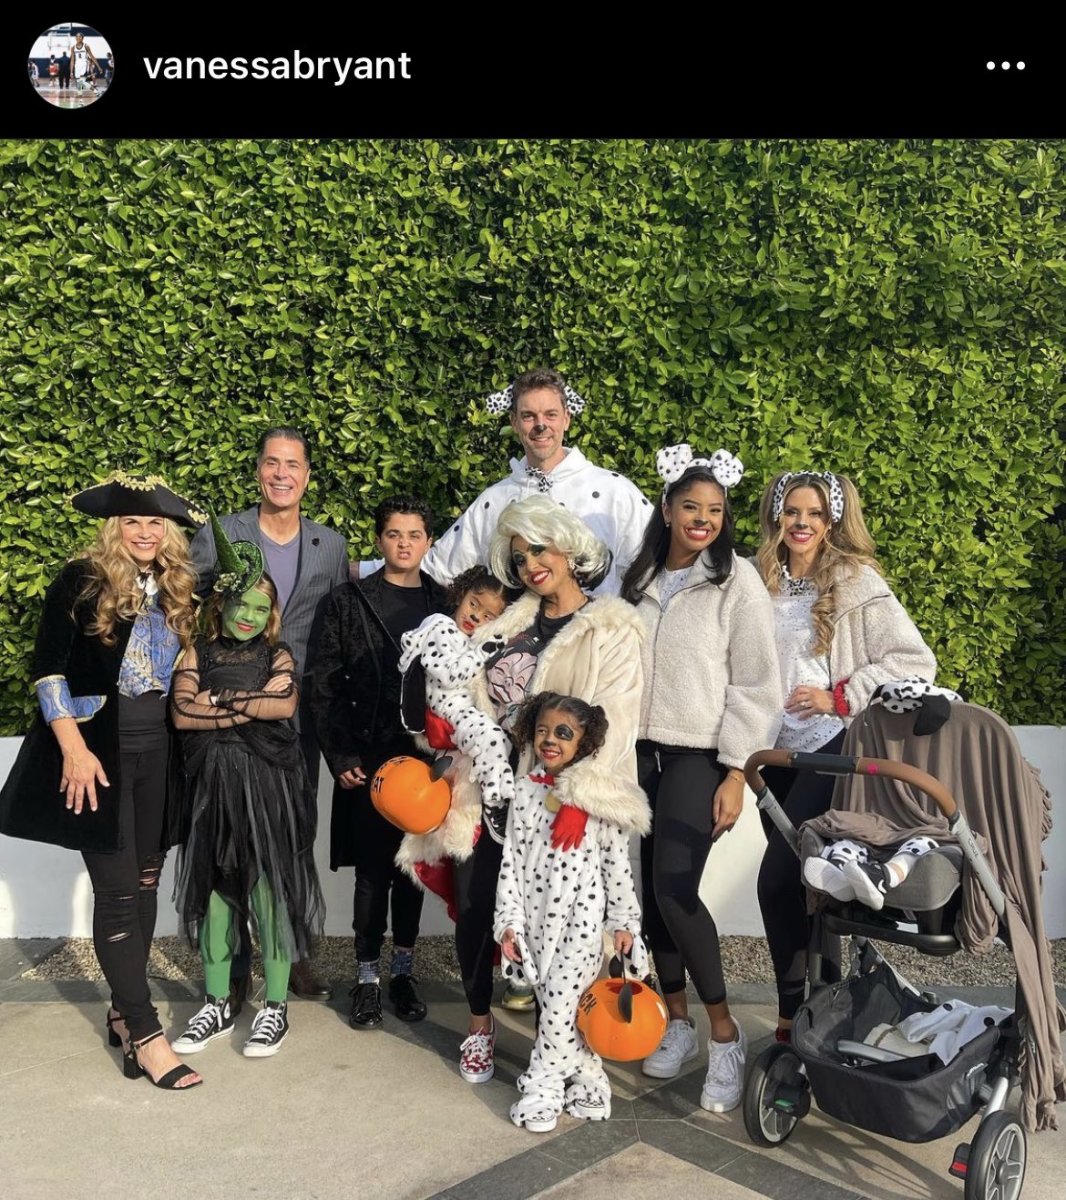 Vanessa Bryant Posts A Heartwarming Photo With Her Daughters, Gasol's And Pelinka's Families Dressed Up For Halloween